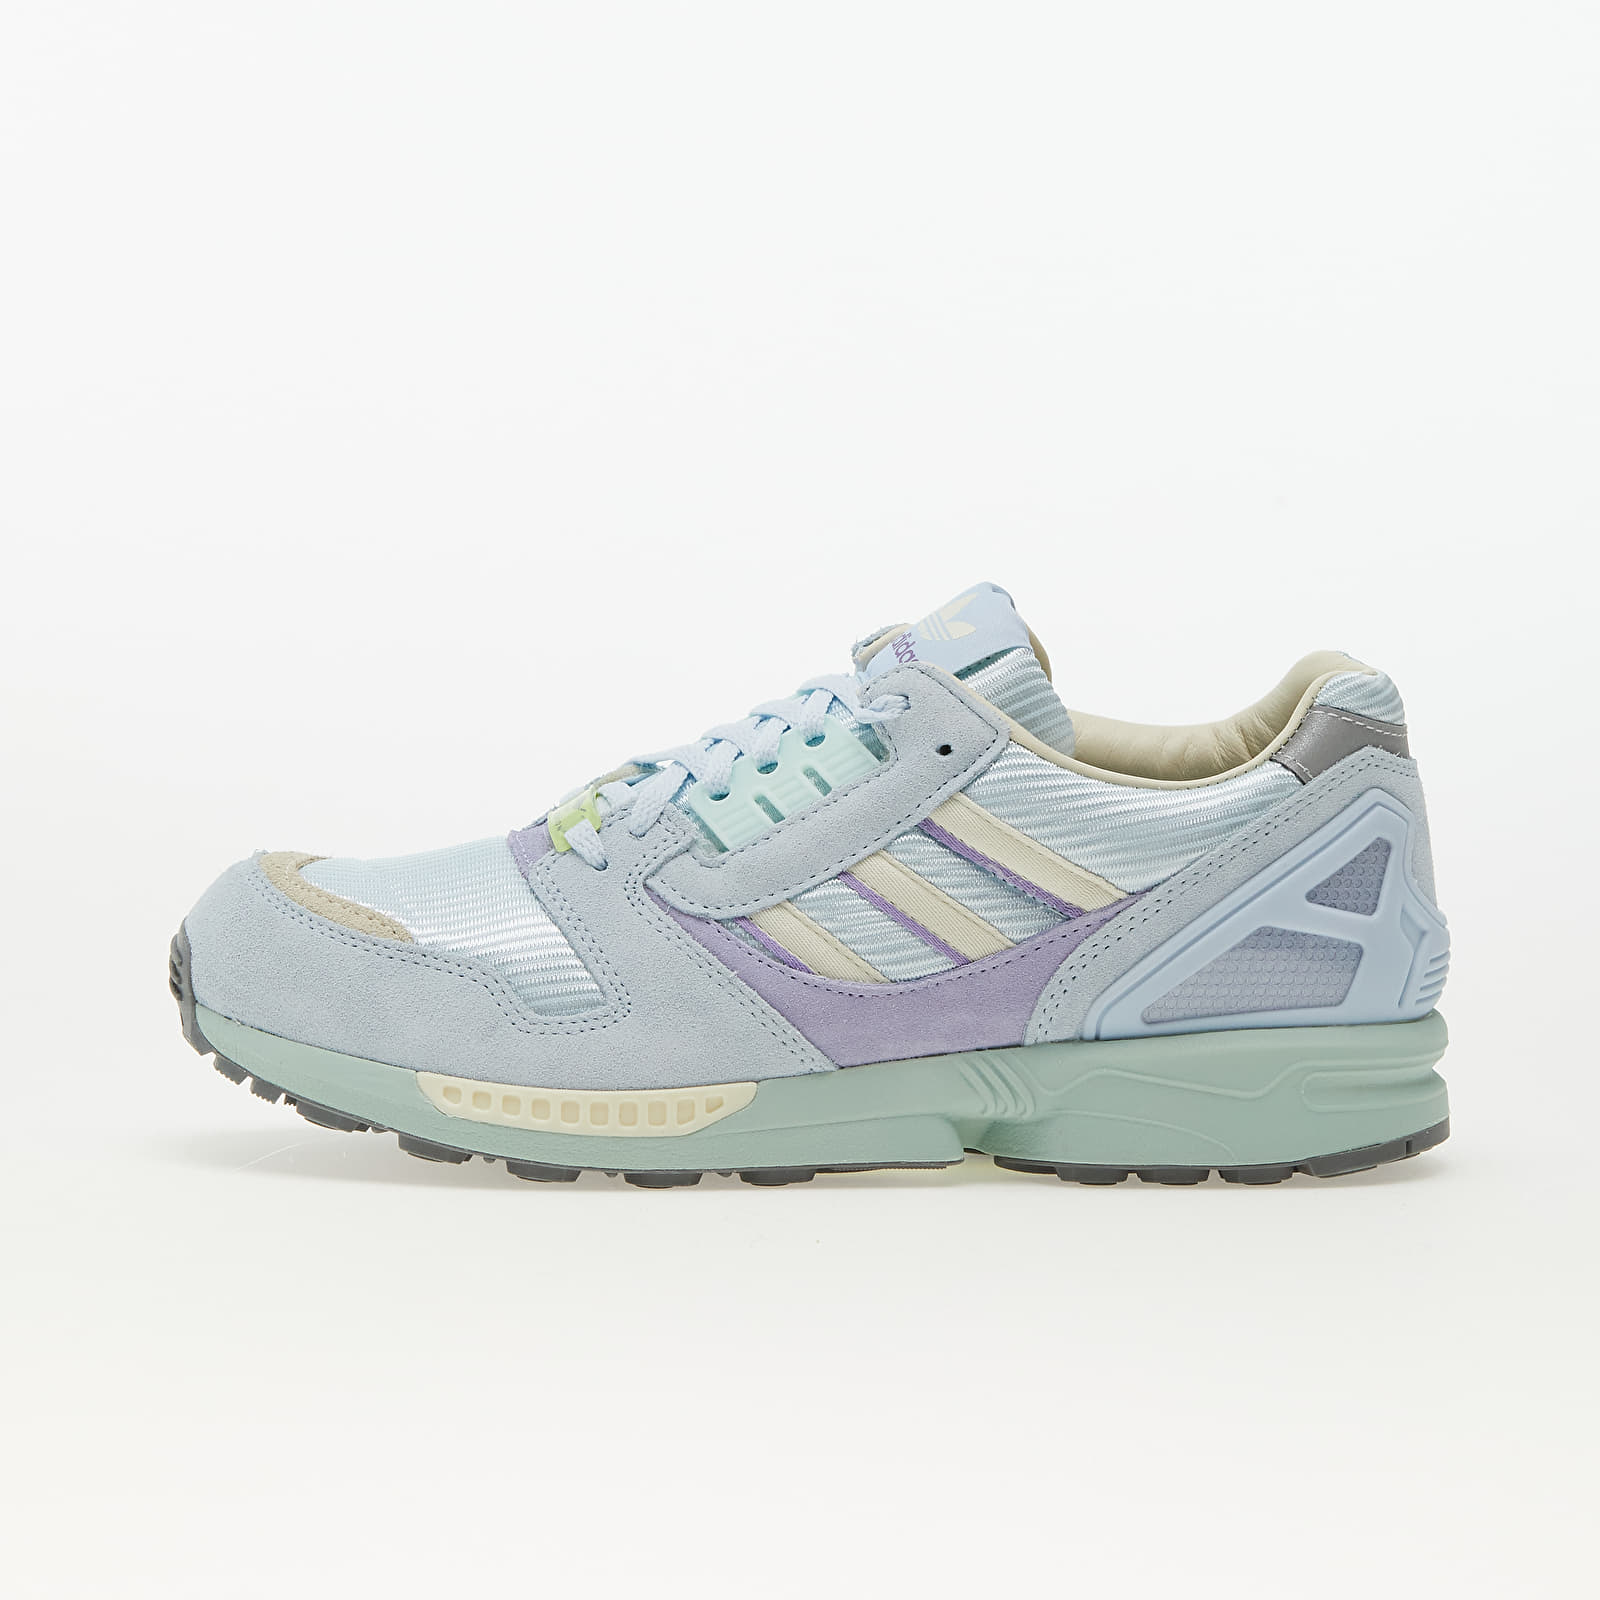 Men's sneakers and shoes adidas ZX 8000 Sky Tint/ Core White